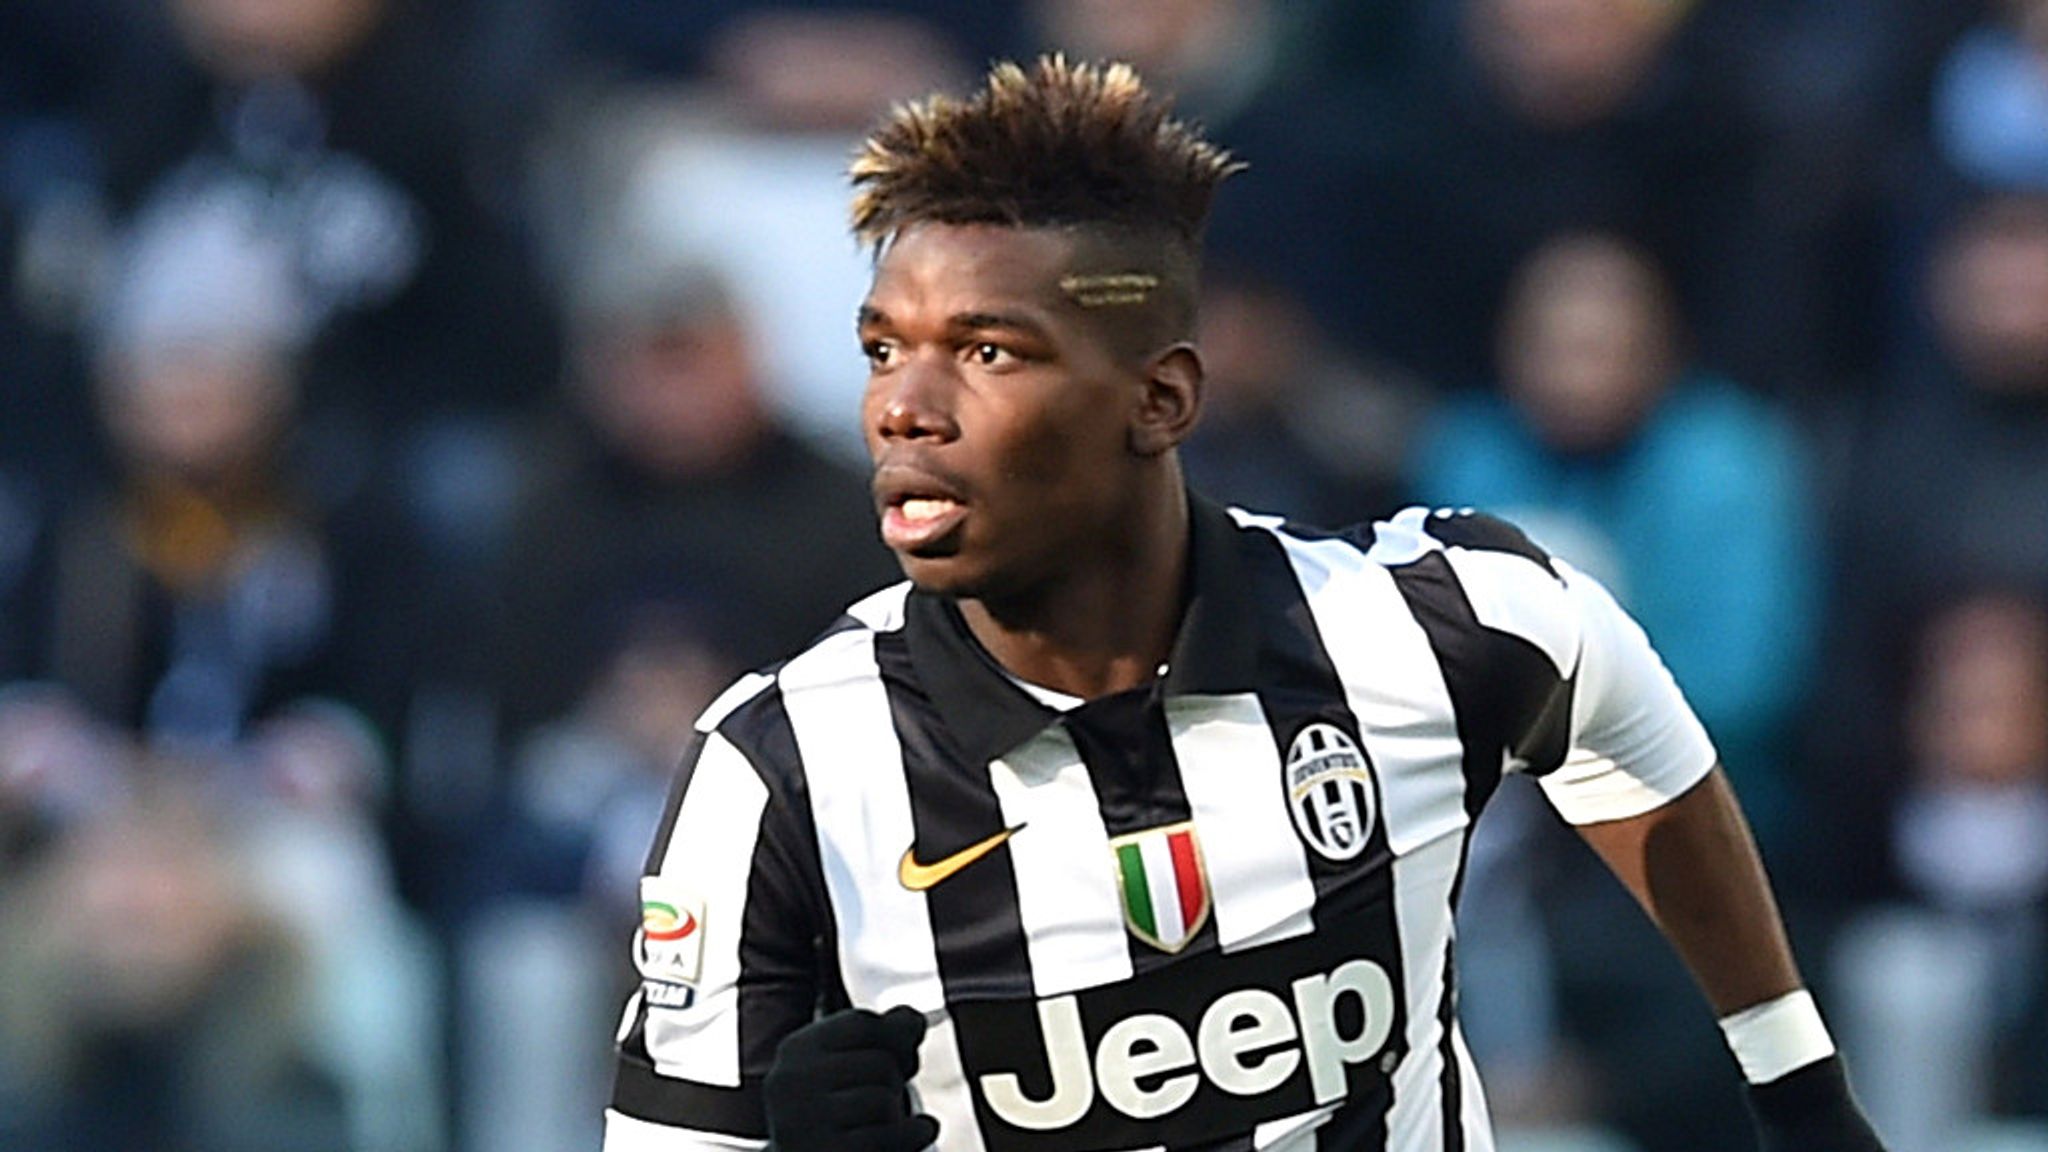 Paul Pogba won't be sold says Juventus' general manager | Football News ...